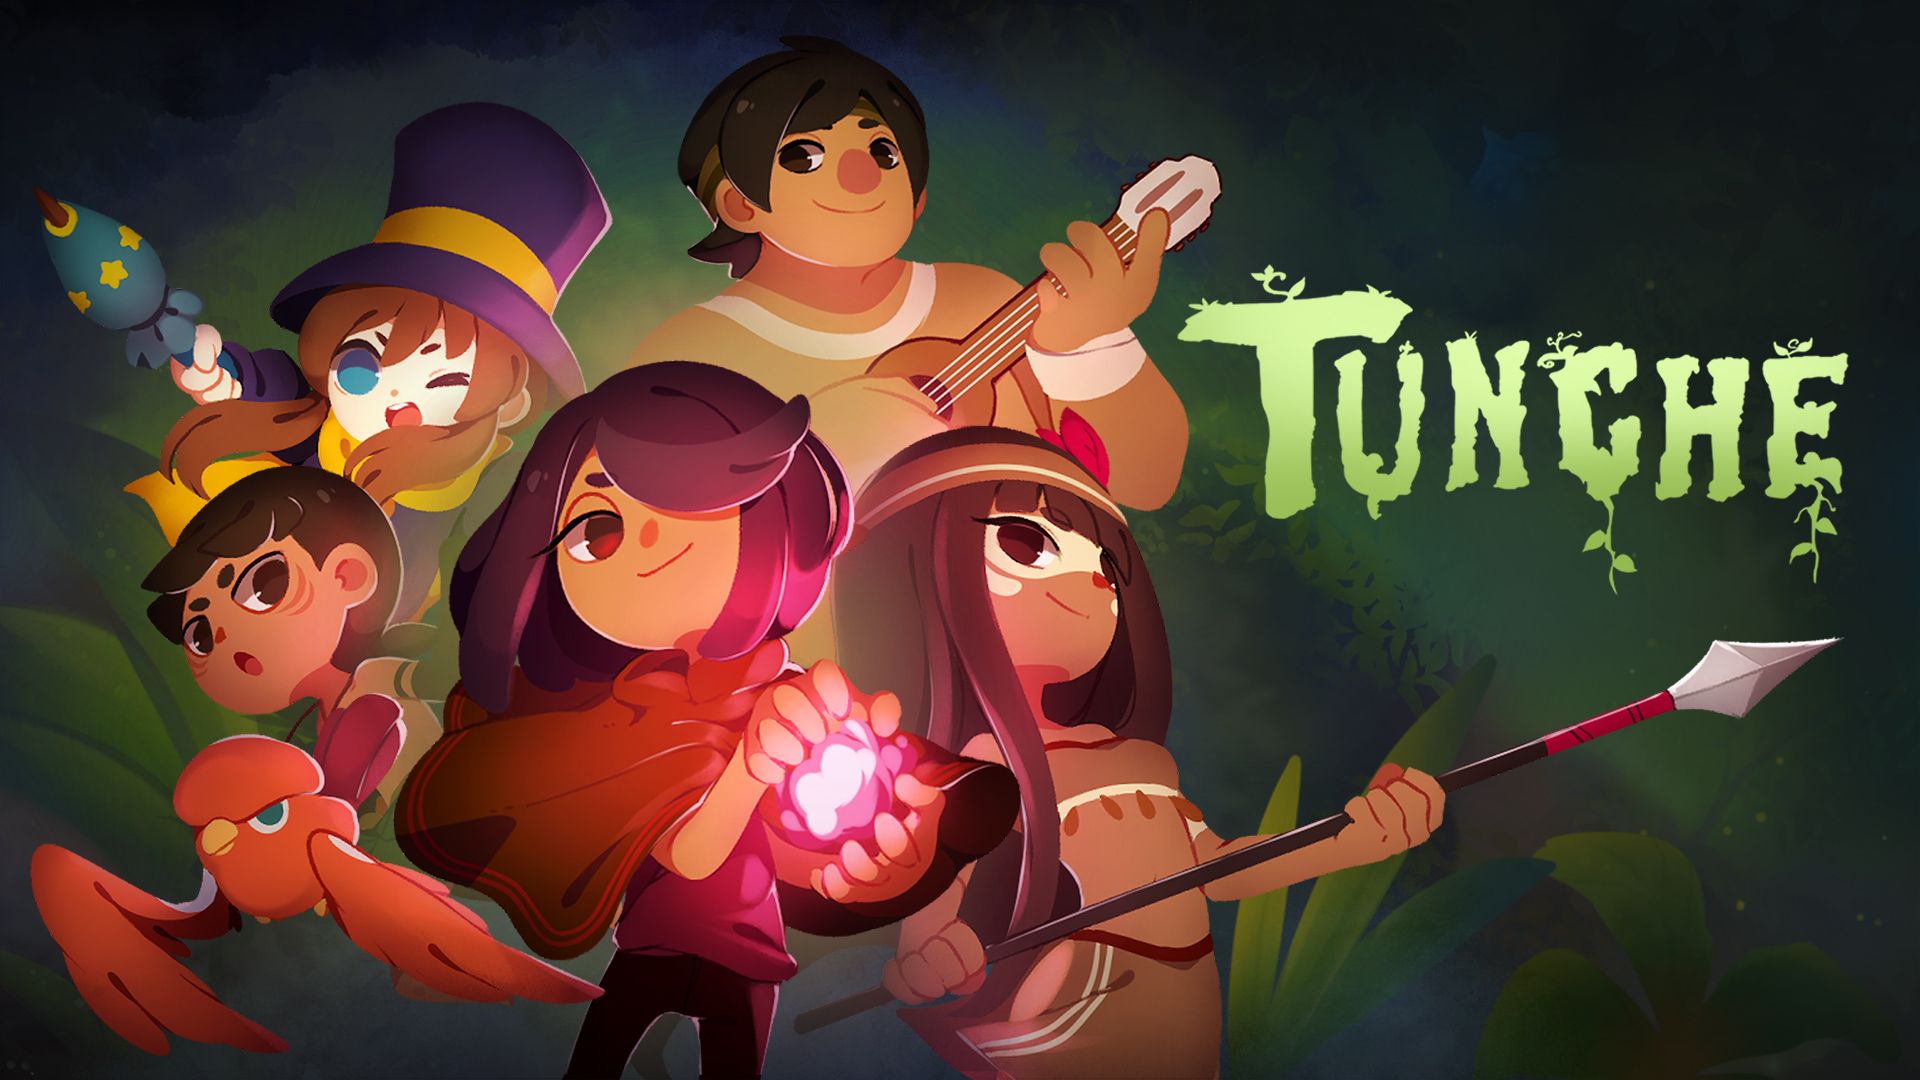 Tunche - Switch Review